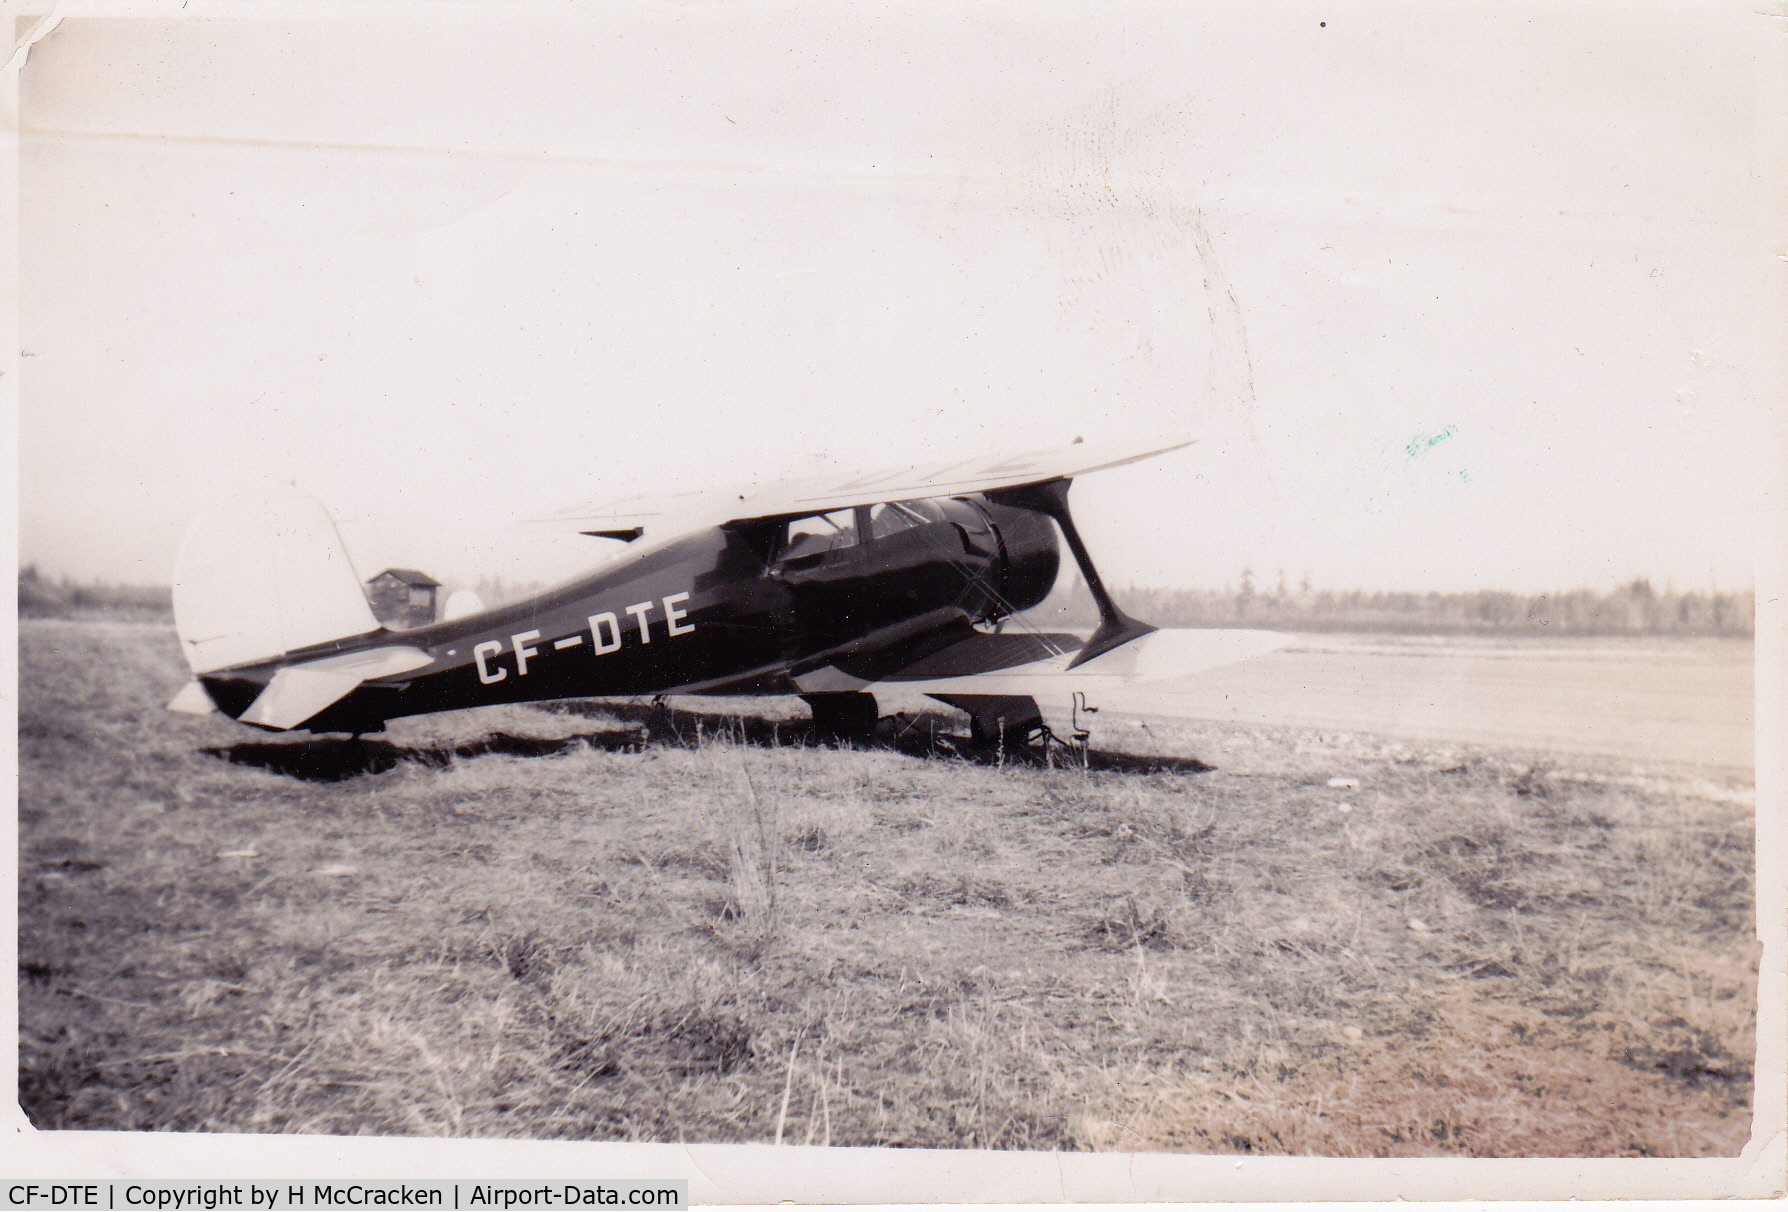 CF-DTE, 1940 Beech D17S Staggerwing C/N 403, Picture found in attic trunk. 













Picture found in trunk.